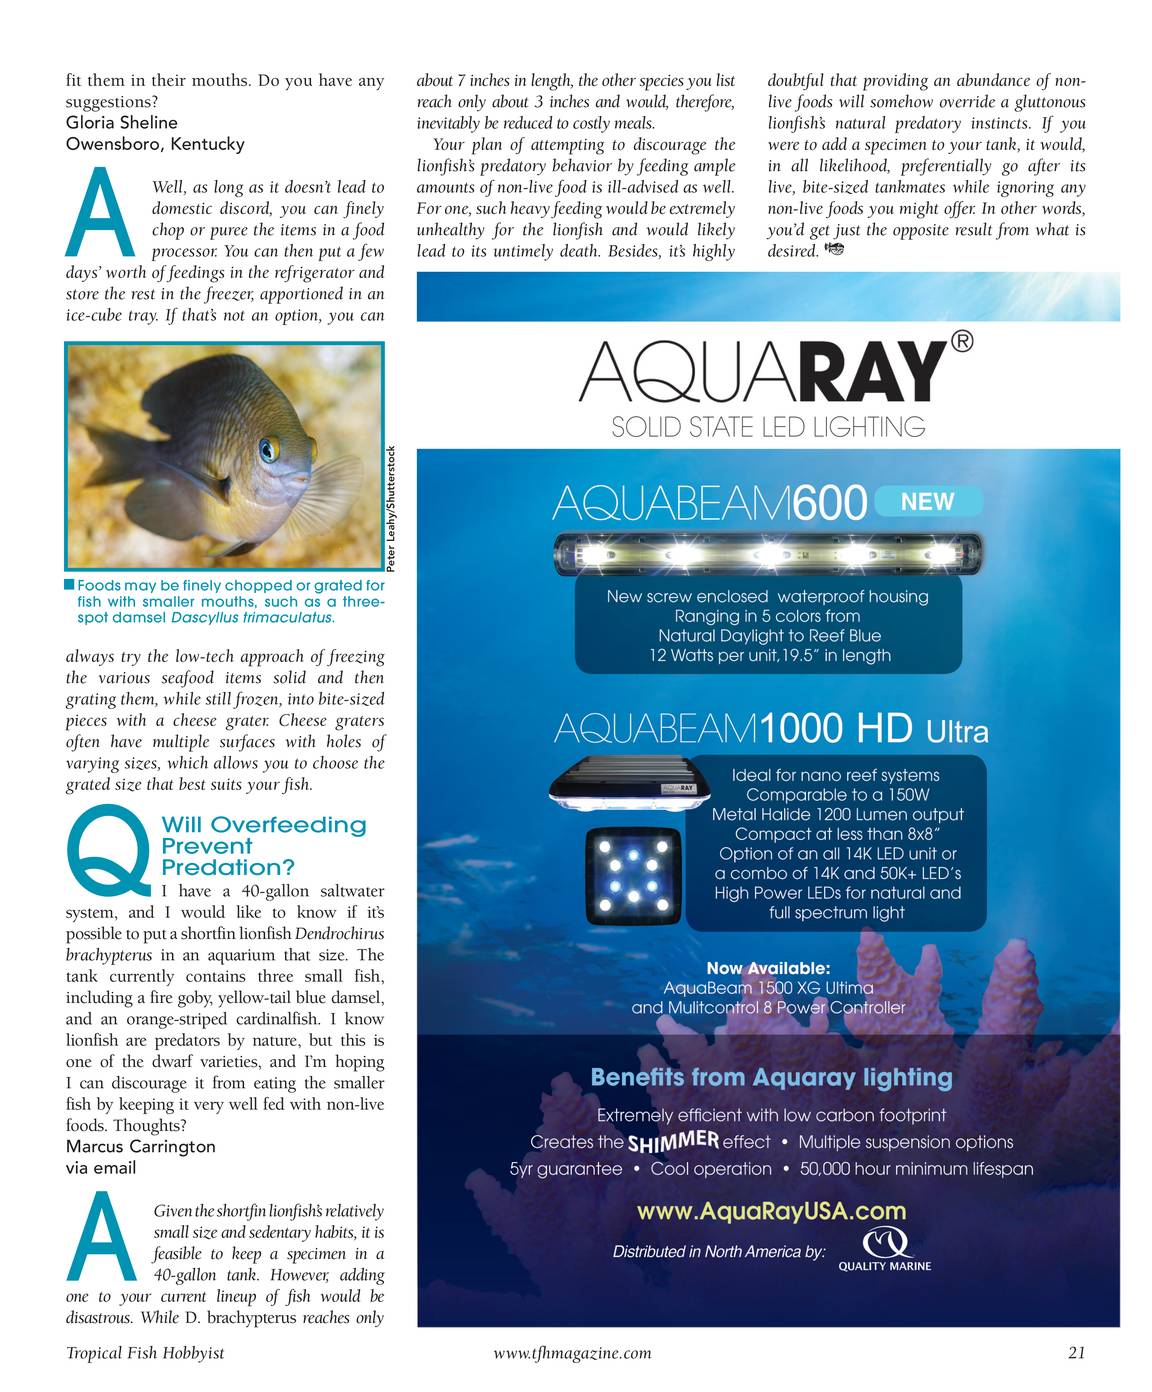 Tropical Fish Hobbyist - July 2011 - page 21